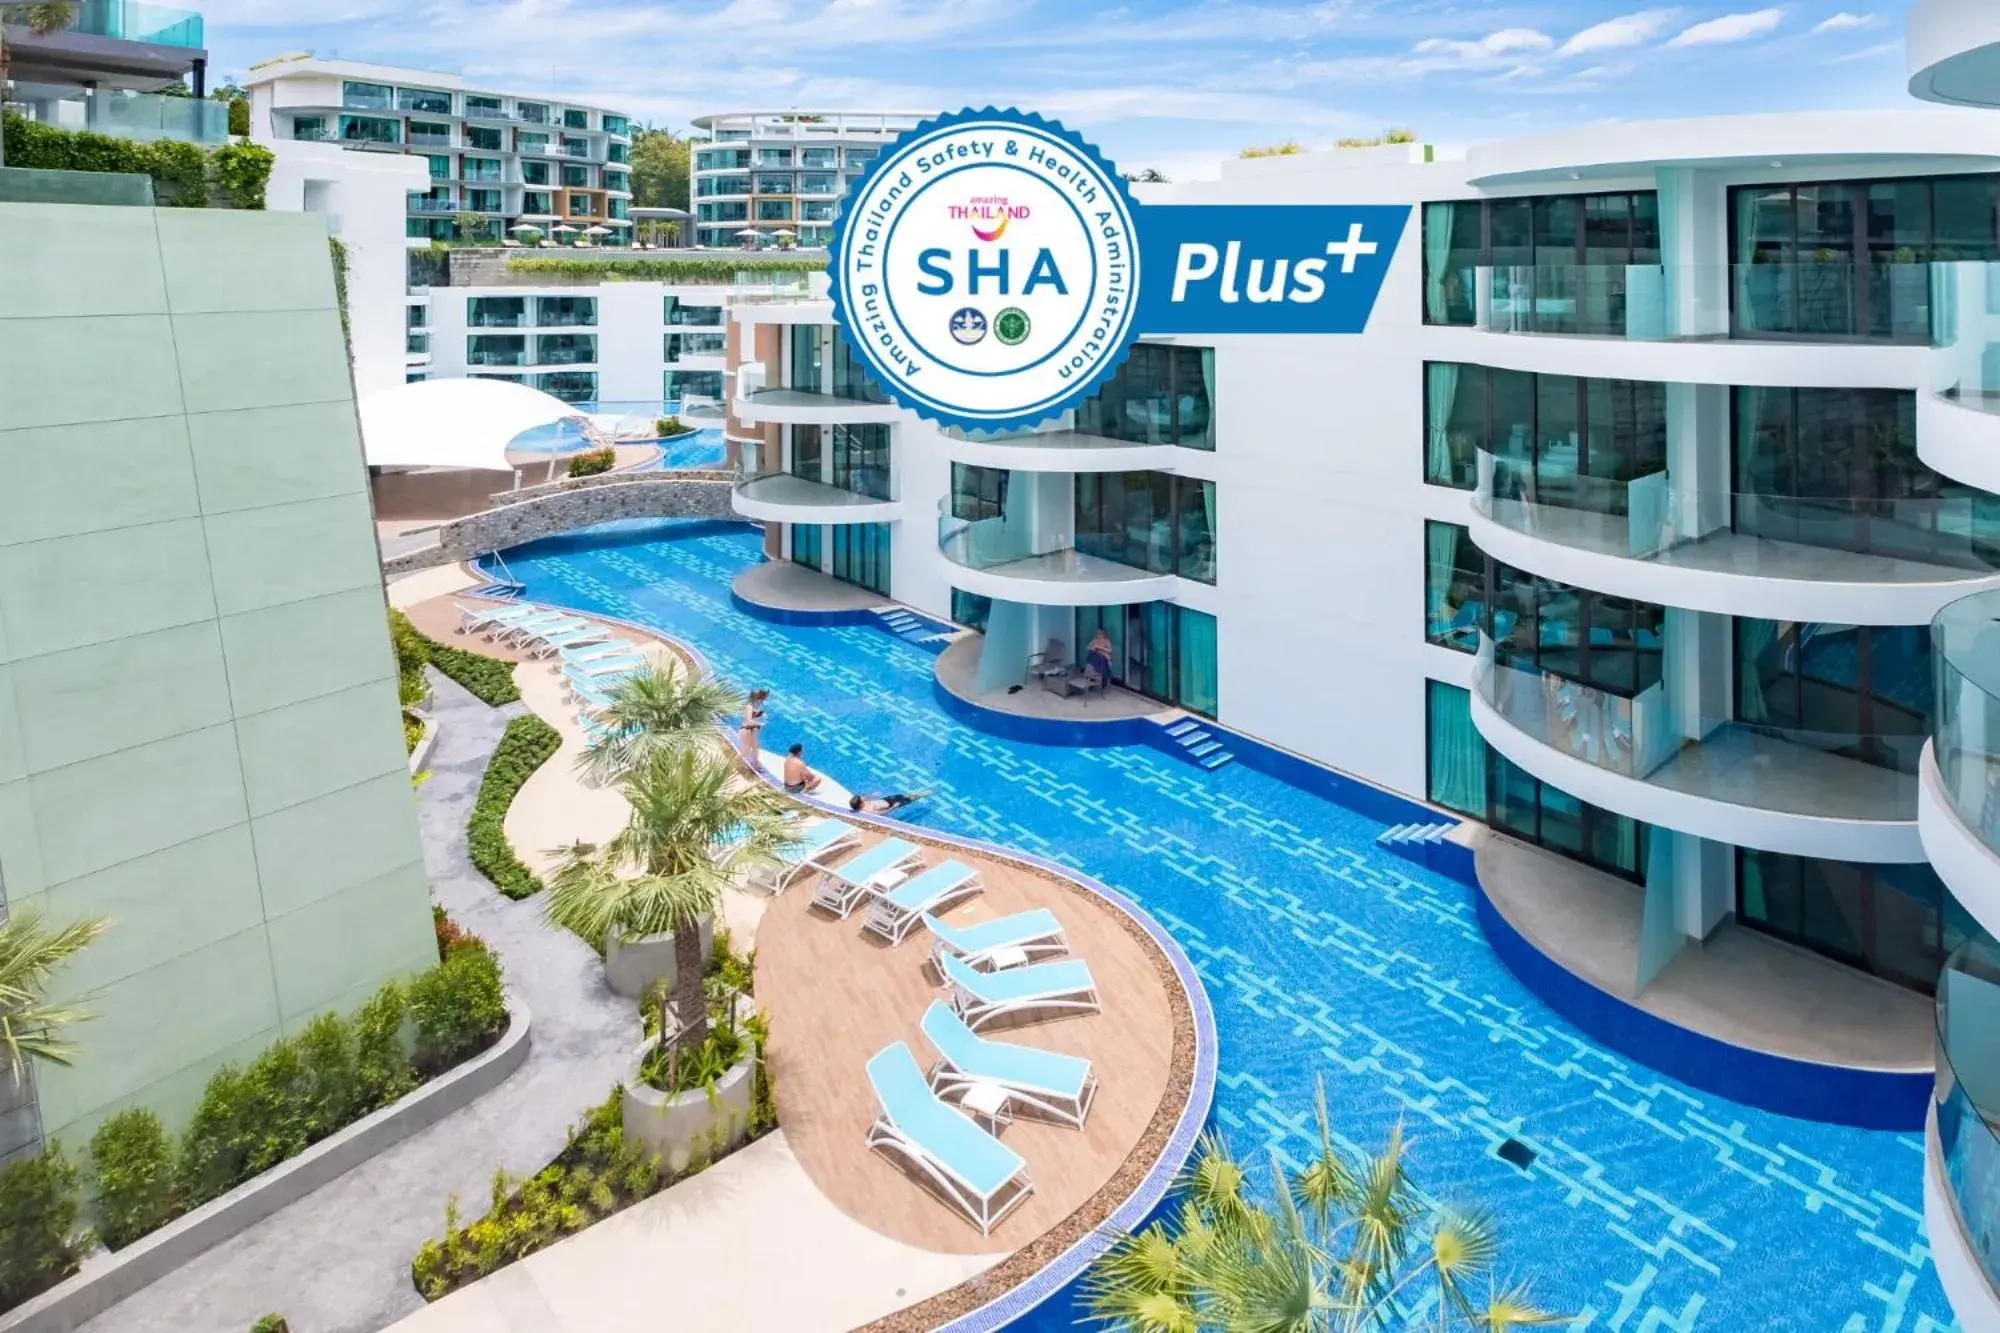 Property building, Pool View in Lets Phuket Twin Sands Resort & Spa-SHA Extra Plus